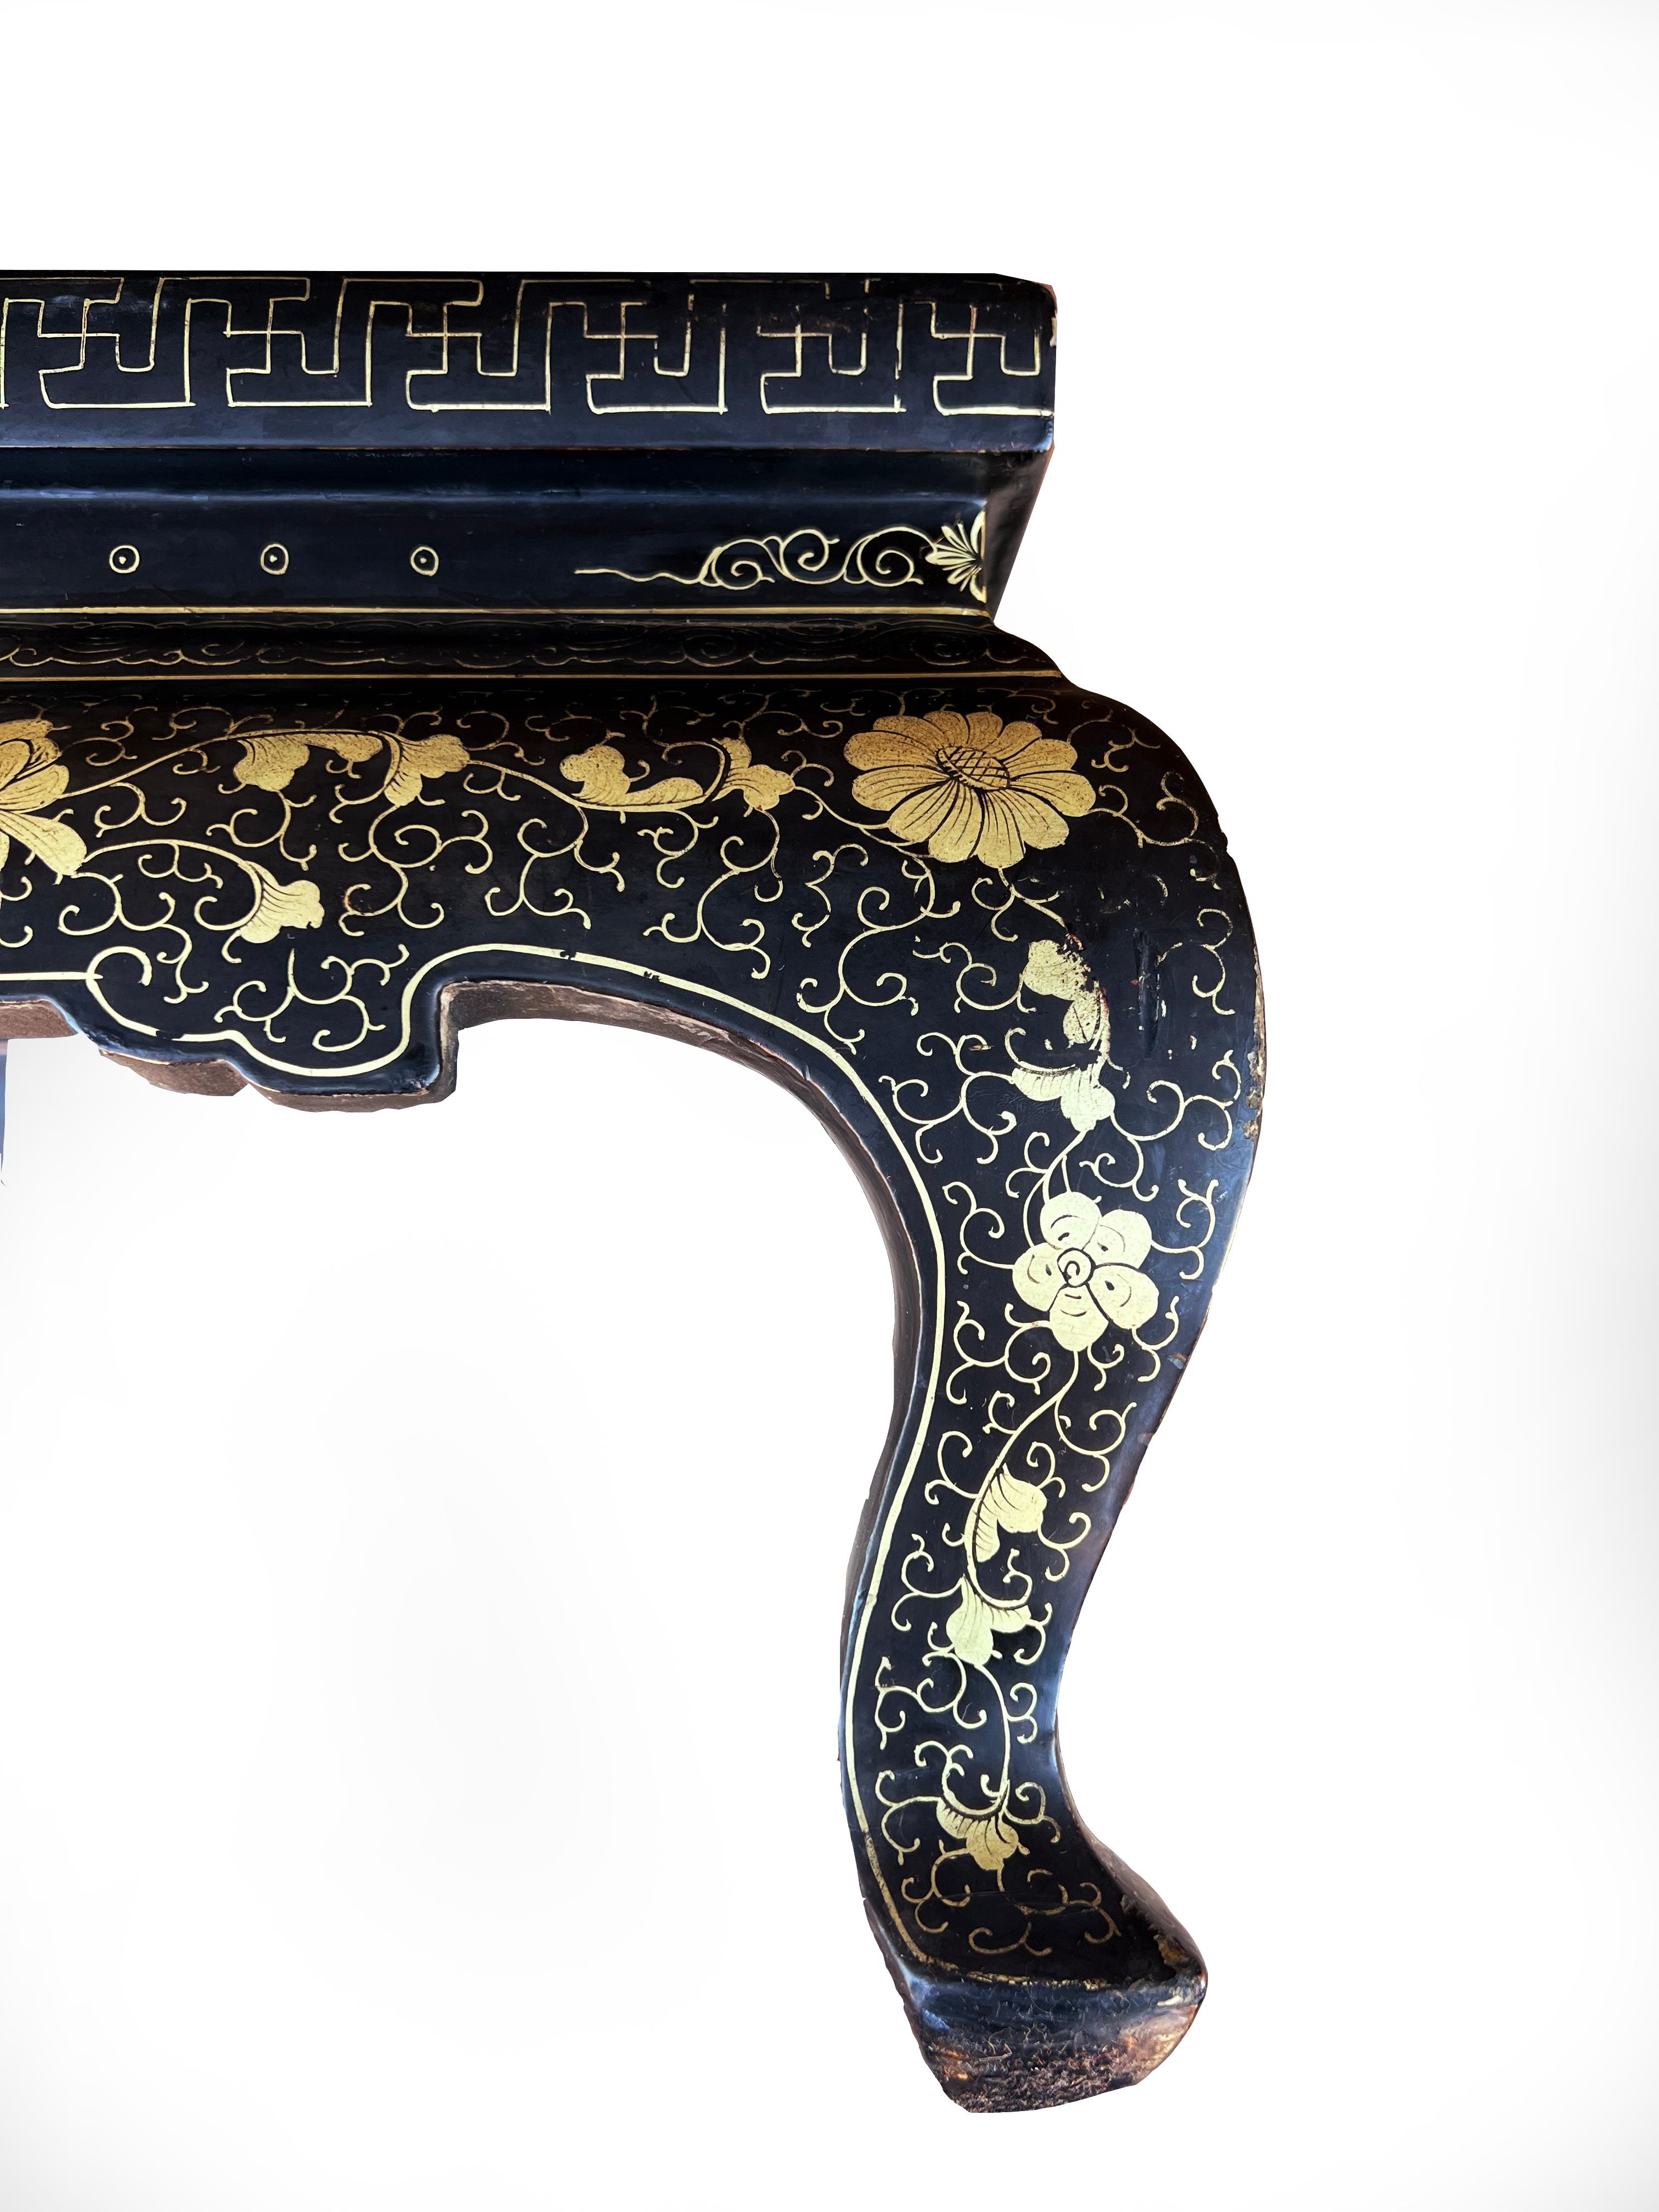 Chinese 19th Century Black Lacquer and Gilt Low Table with Cabriole Legs For Sale